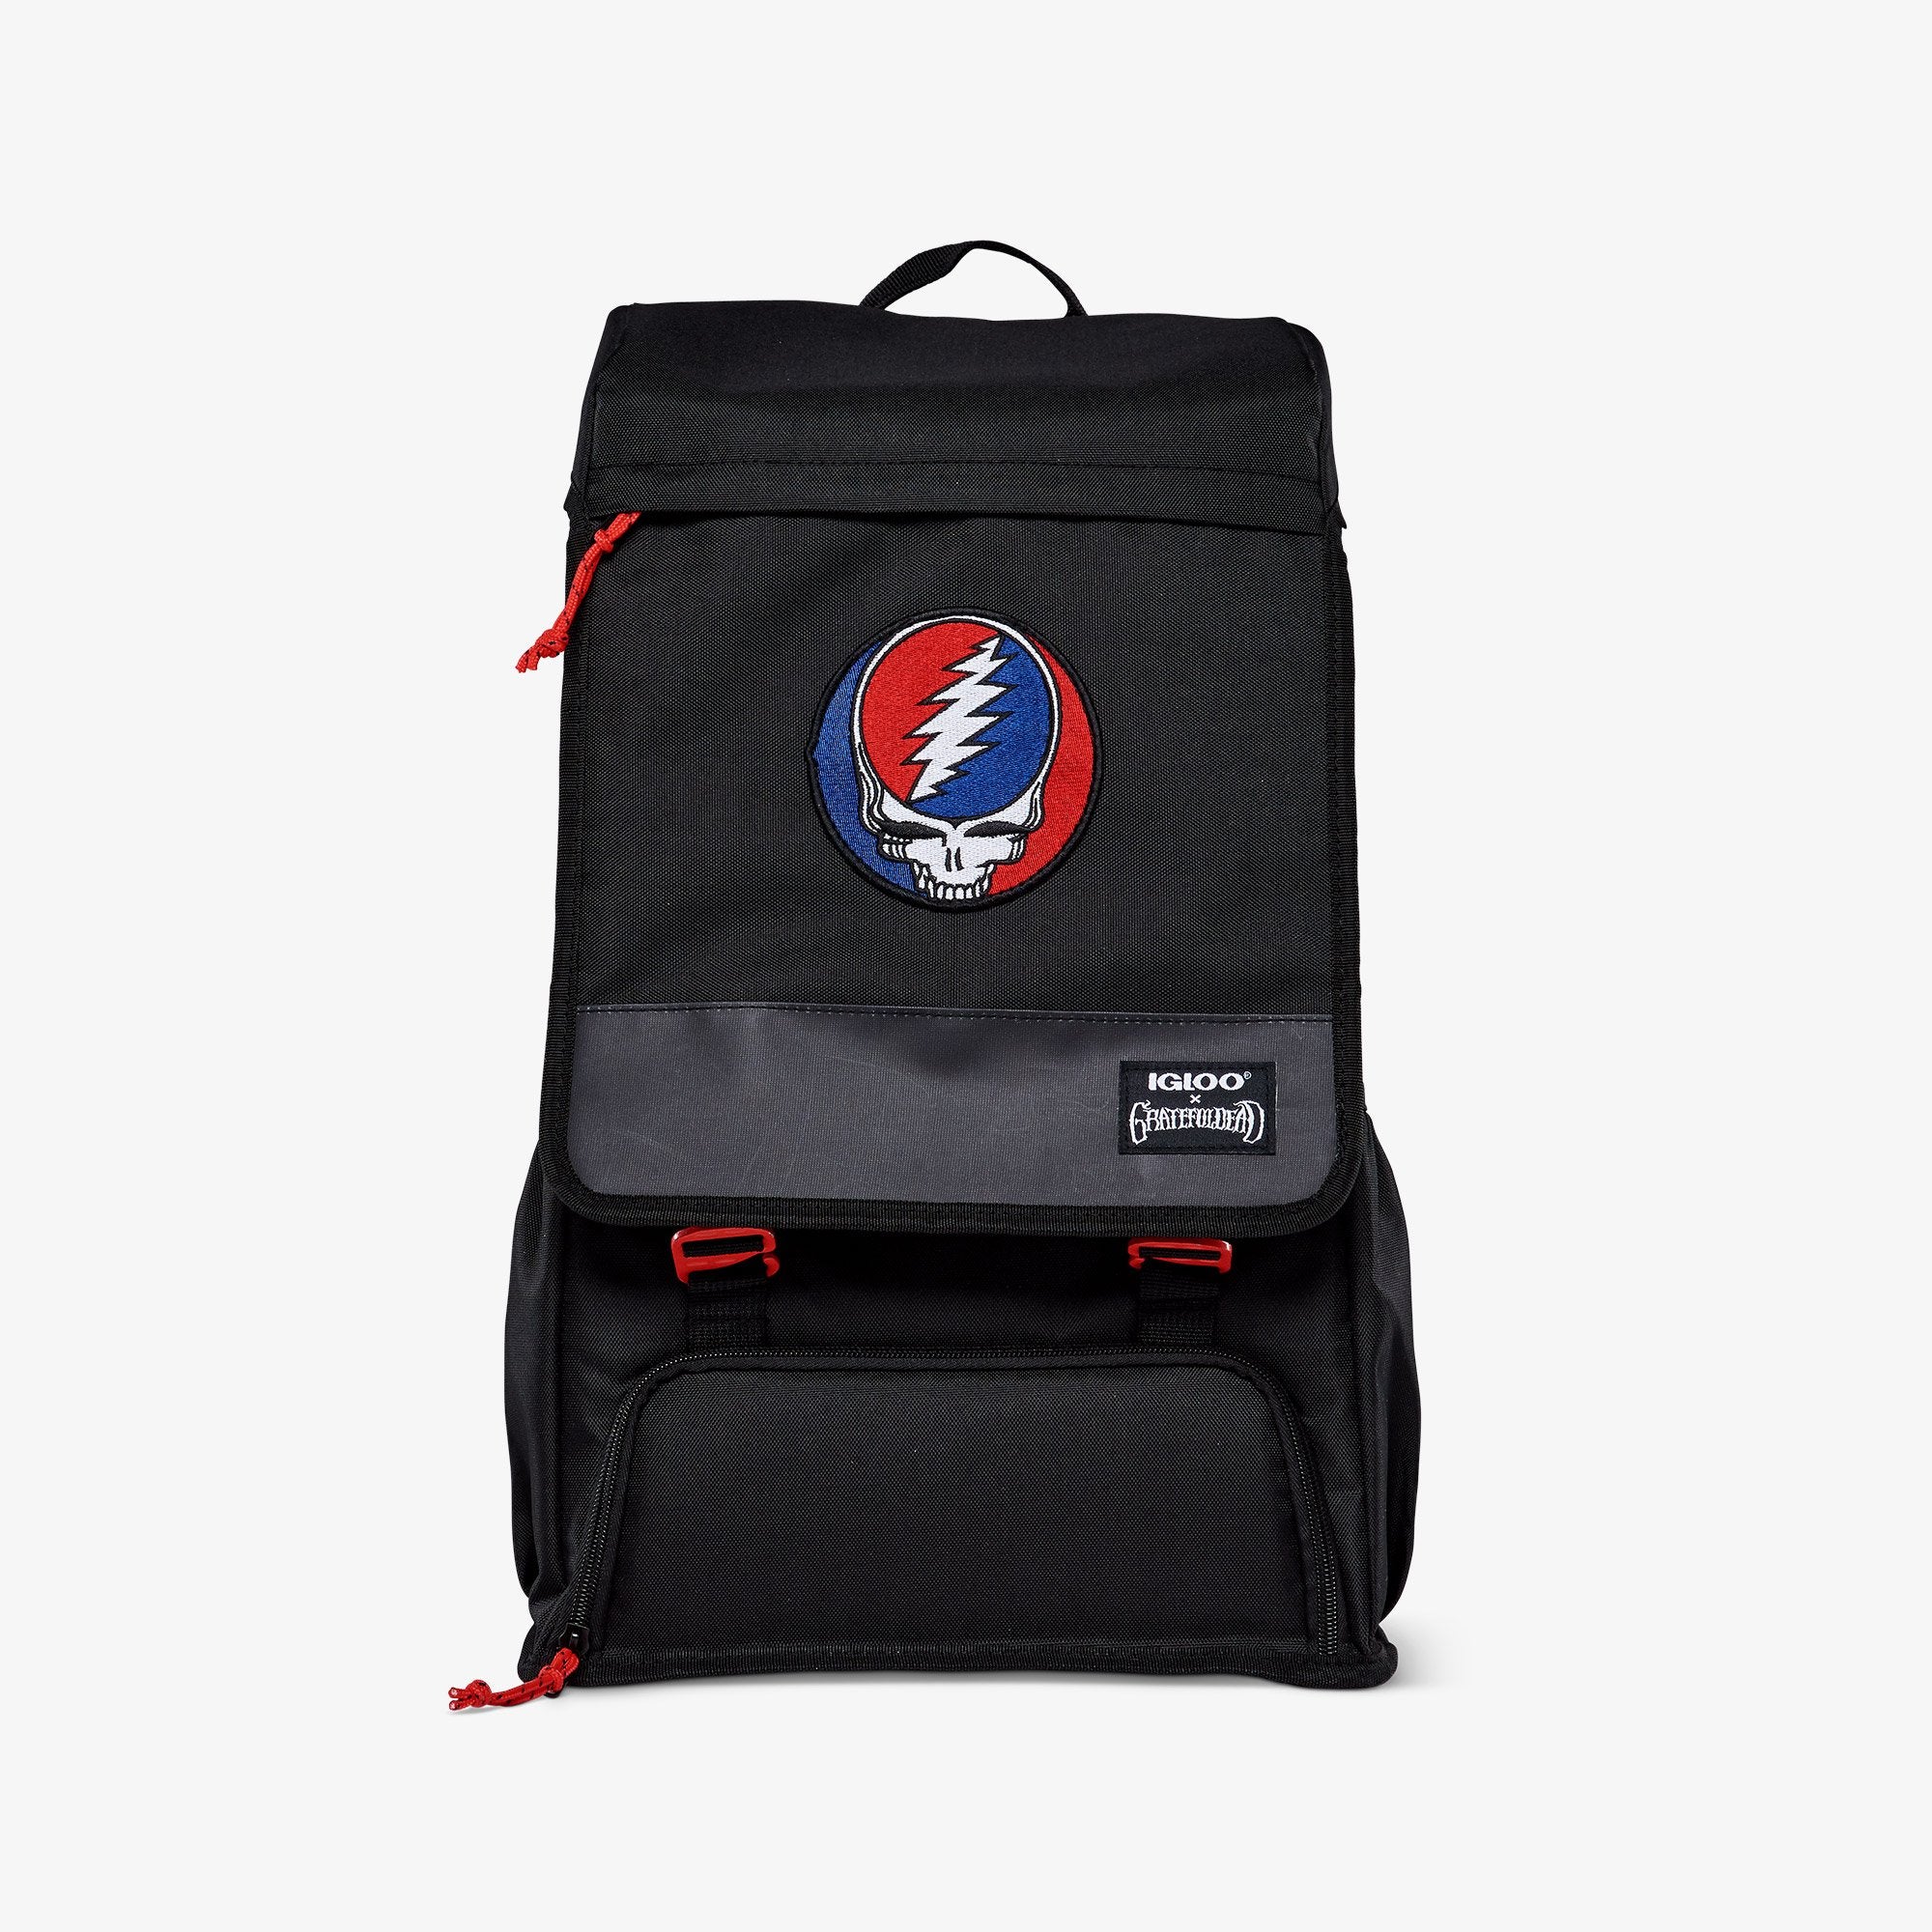 Grateful Dead Steal Your Face Daytripper Backpack Igloo